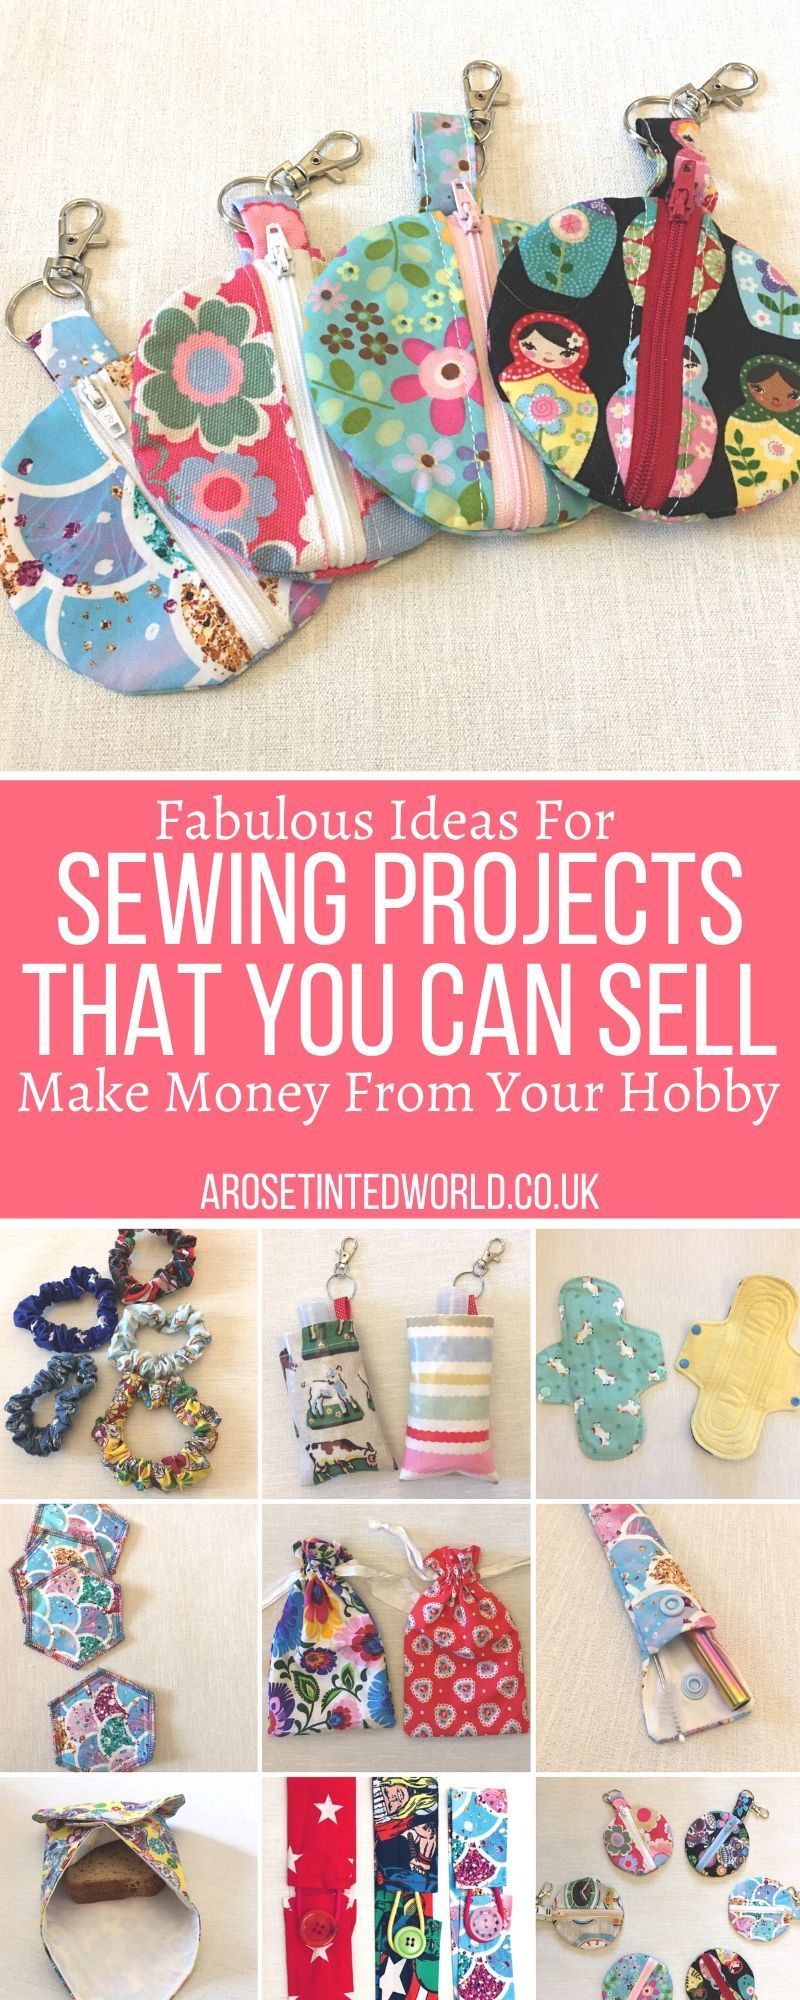 Sewing Projects That You Can Sell - Sewing Projects That You Can Sell -   19 fabric crafts to sell ideas